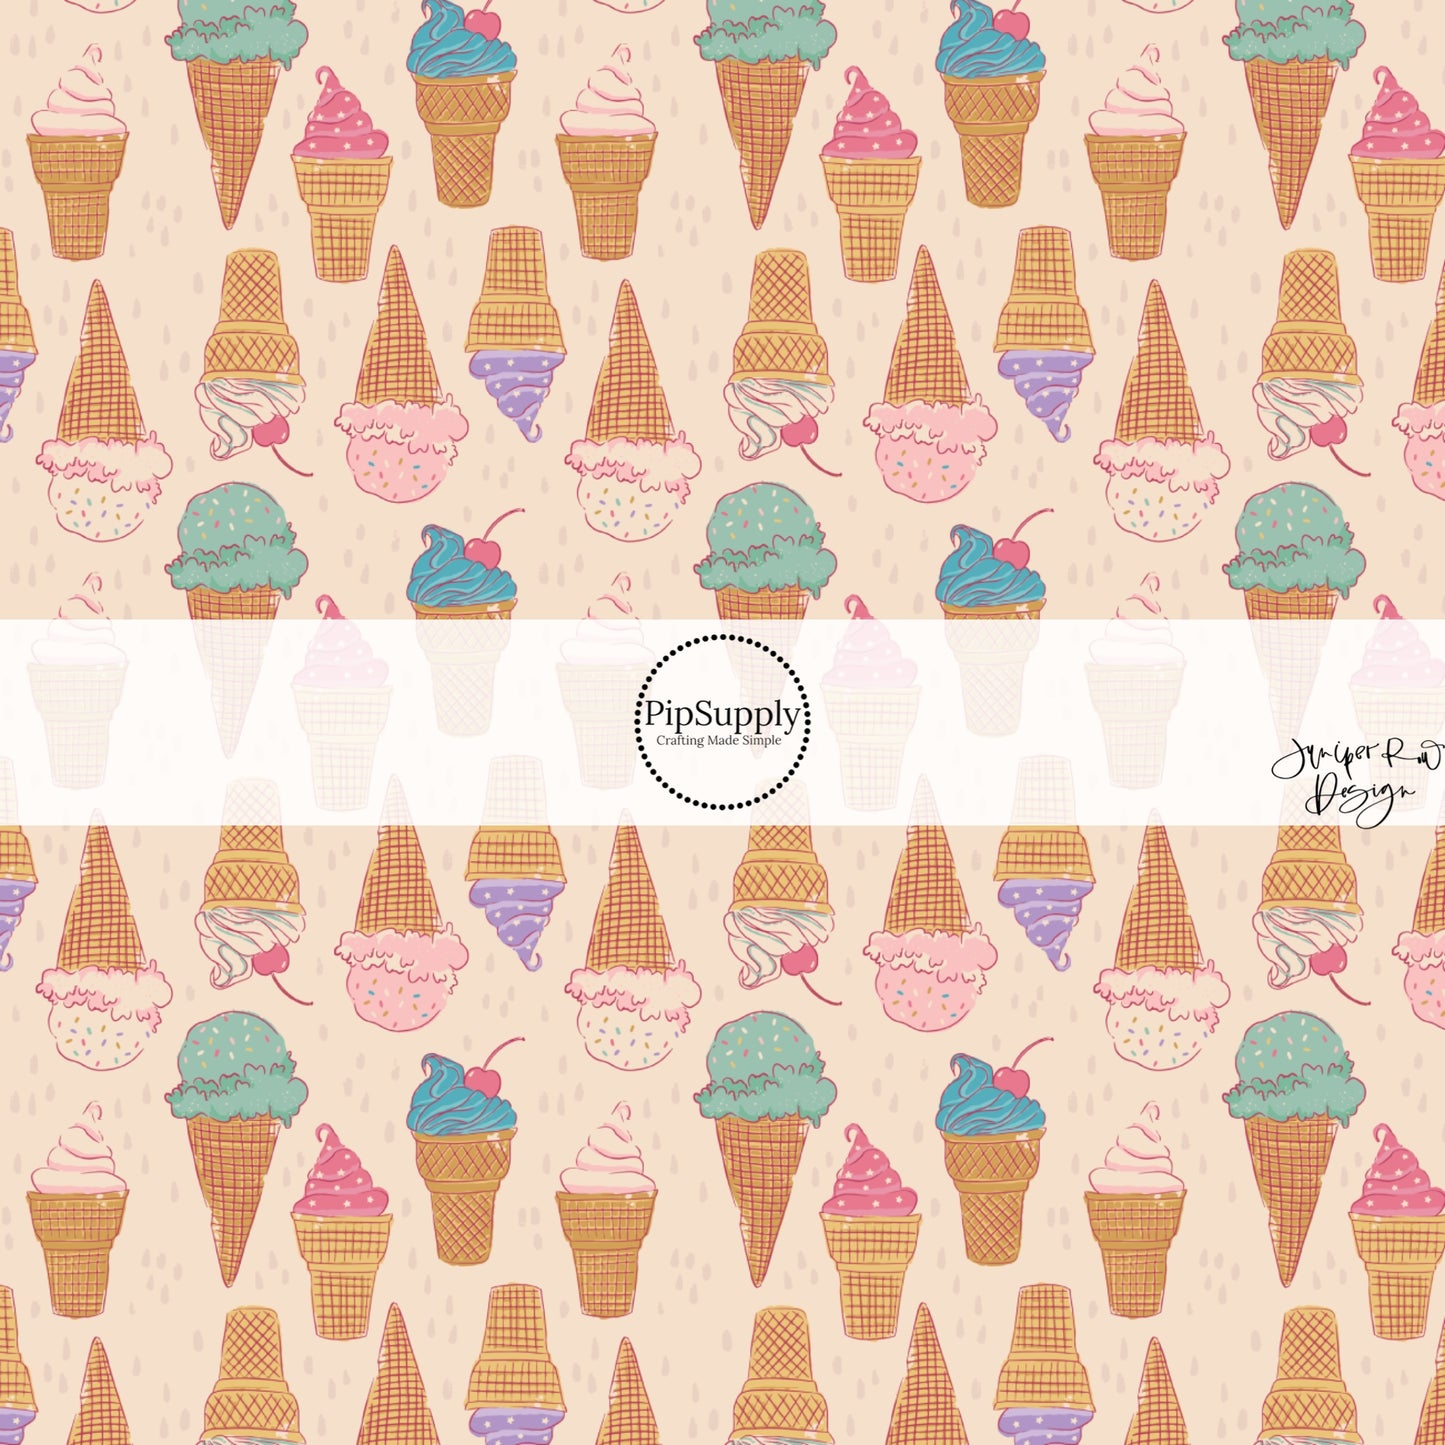 This summer fabric by the yard features ice cream treats on cream. This fun summer themed fabric can be used for all your sewing and crafting needs!